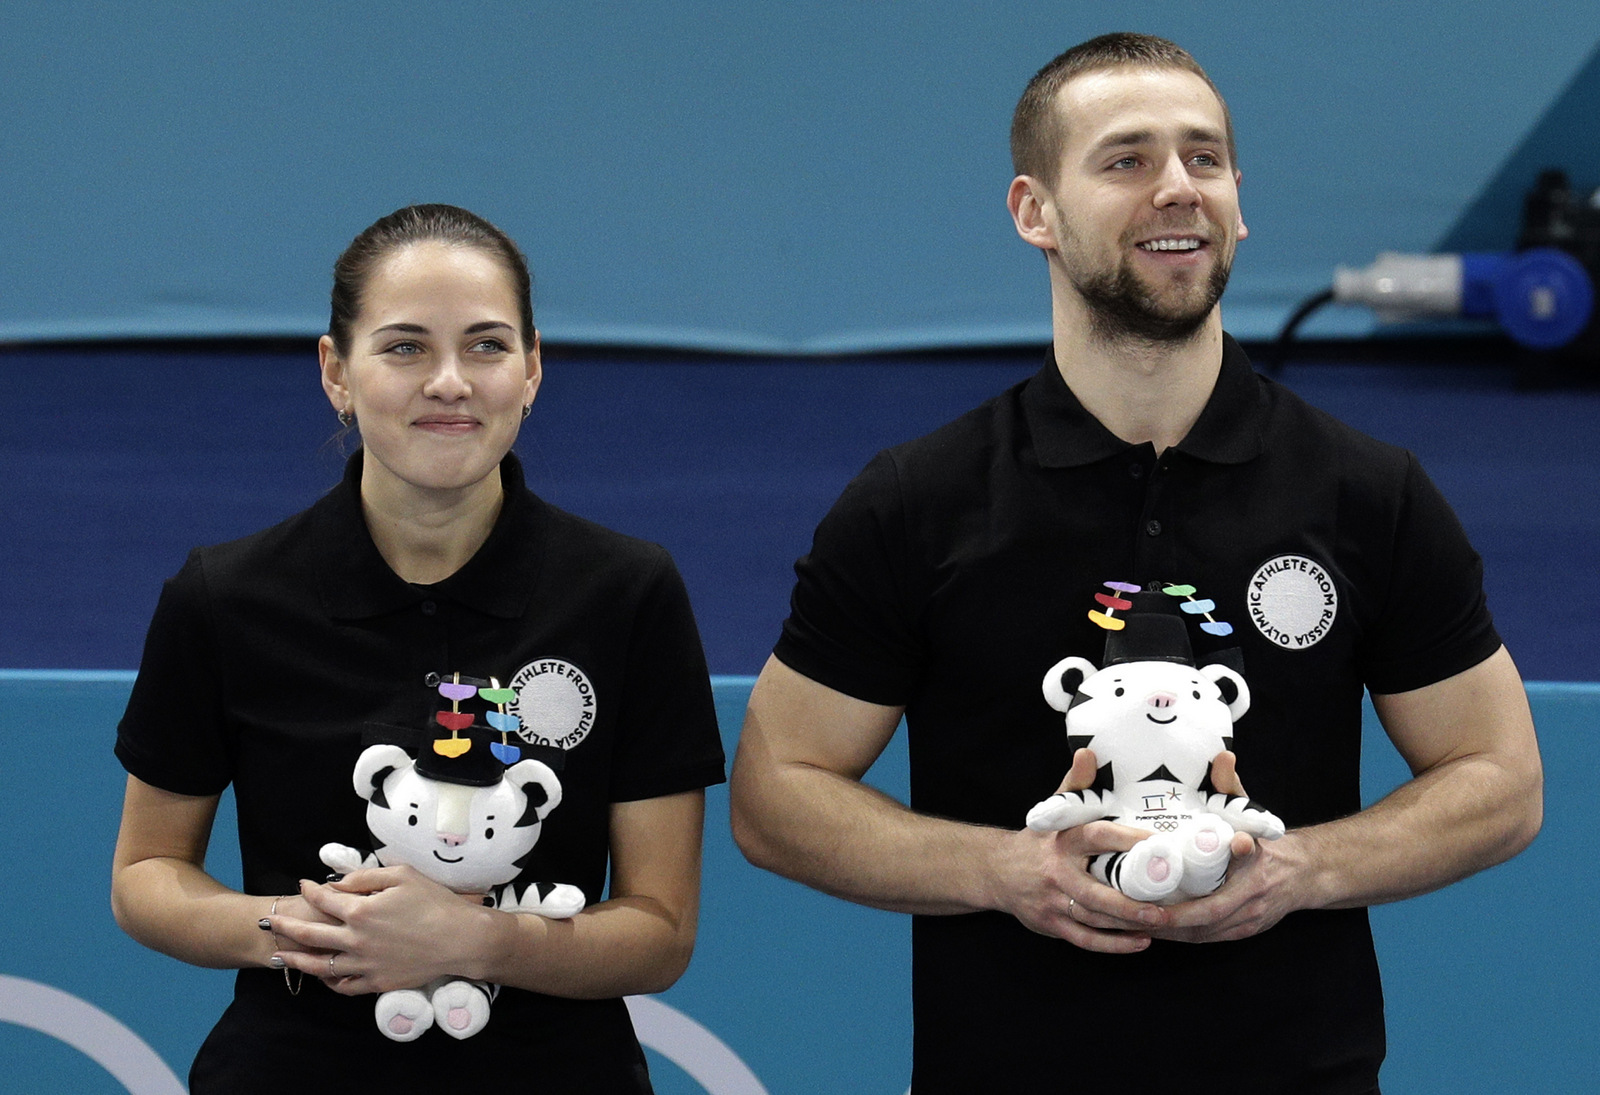 Russian athletes Anastasia Bryzgalova, left, and Alexander Krushelnitsky smile as they win bronze medal during the venue ceremony for the mixed doubles curling match at the 2018 Winter Olympics in Gangneung, South Korea, Feb. 13, 2018. (AP/Aaron Favila)